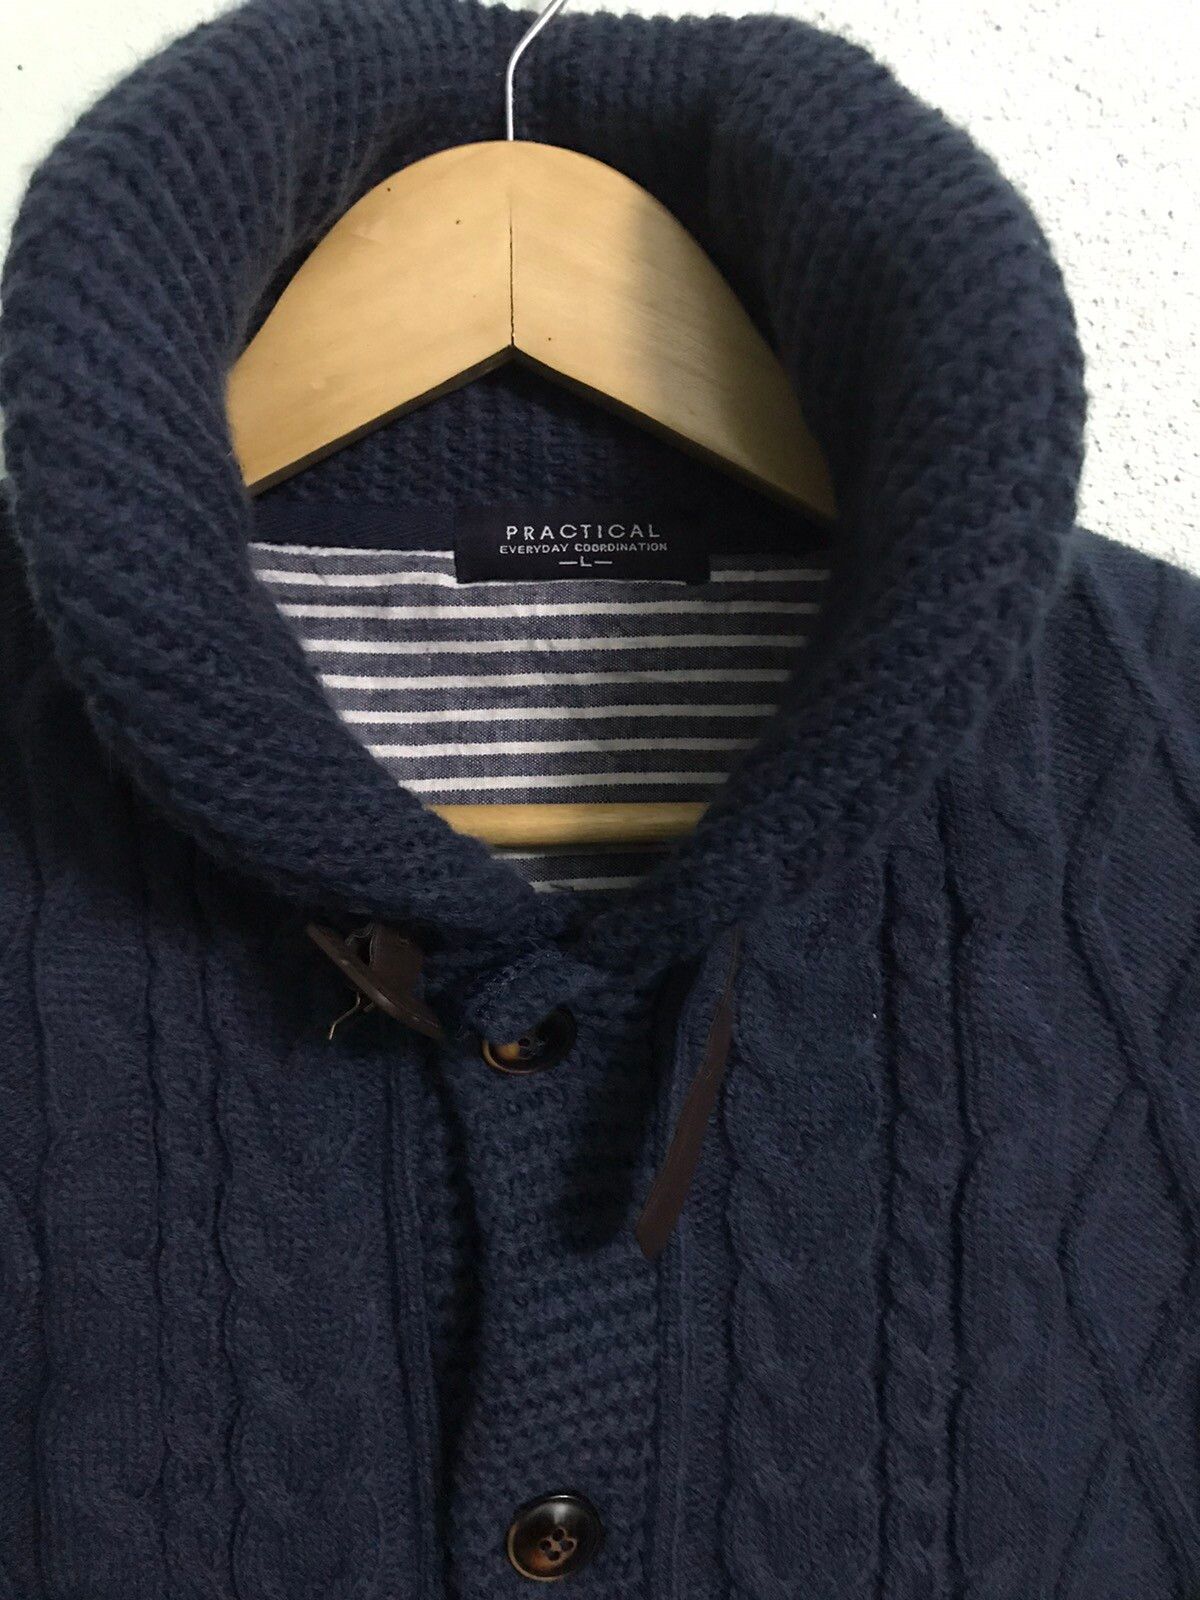 Japanese Brand - Practical cable knit fleece jacket - gh0220 - 2